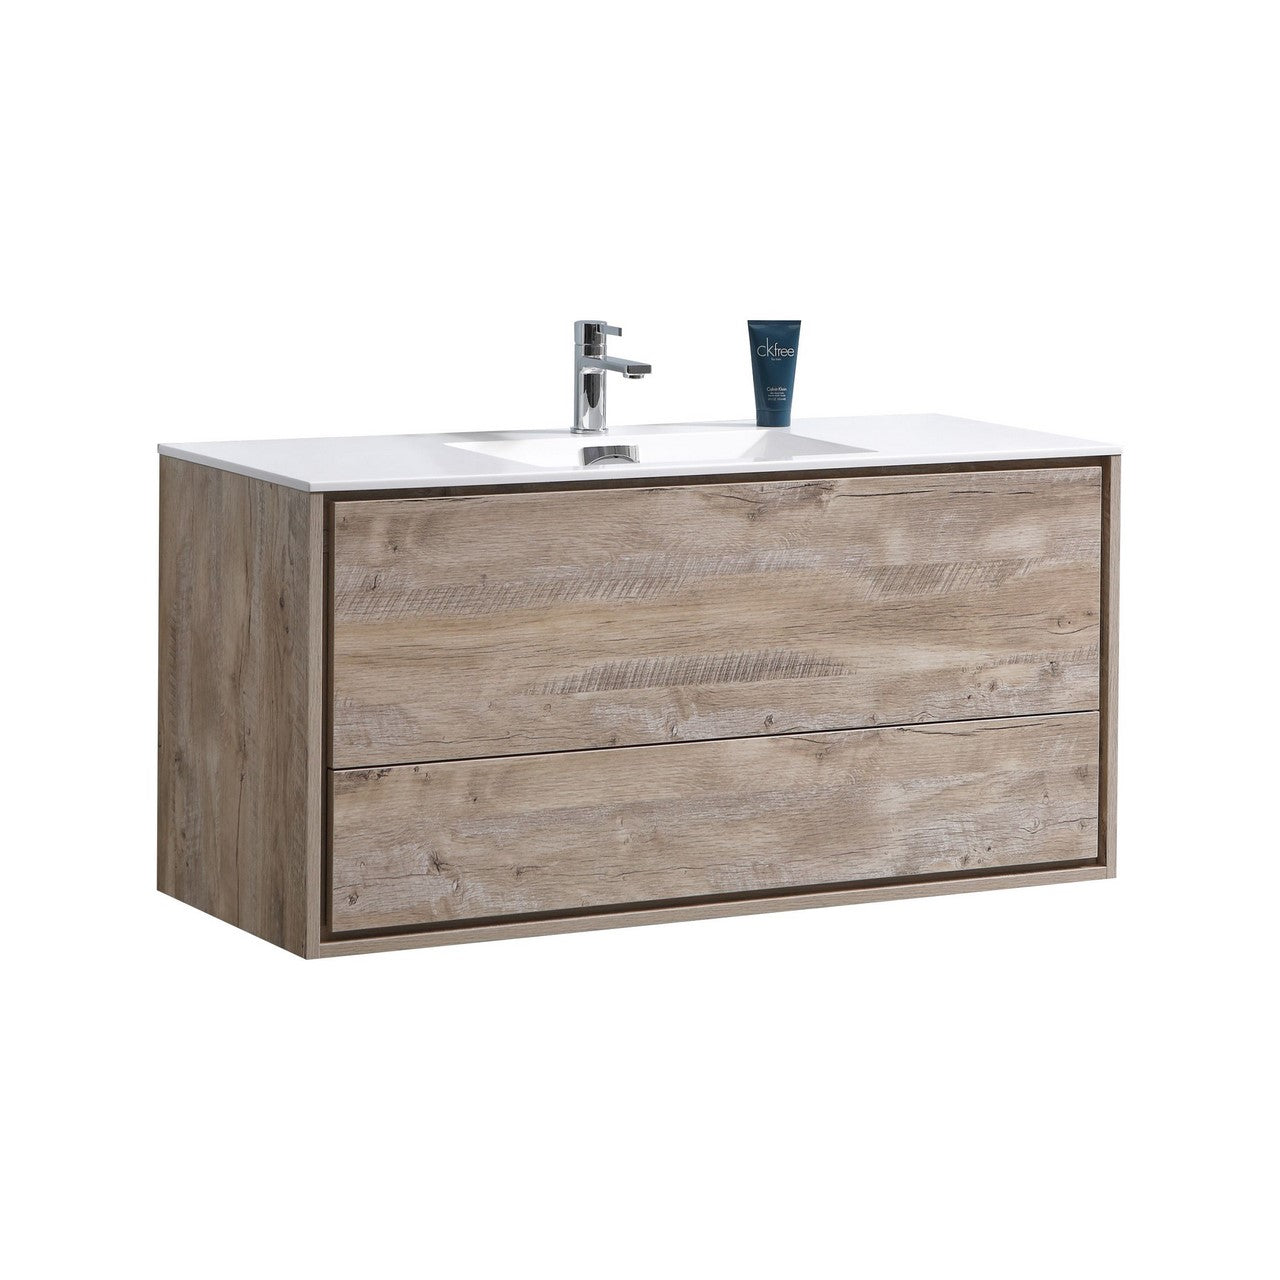 KUBEBATH De Lusso DL48S-NW 48" Single Wall Mount Bathroom Vanity in Nature Wood with White Acrylic Composite, Integrated Sink, Angled View